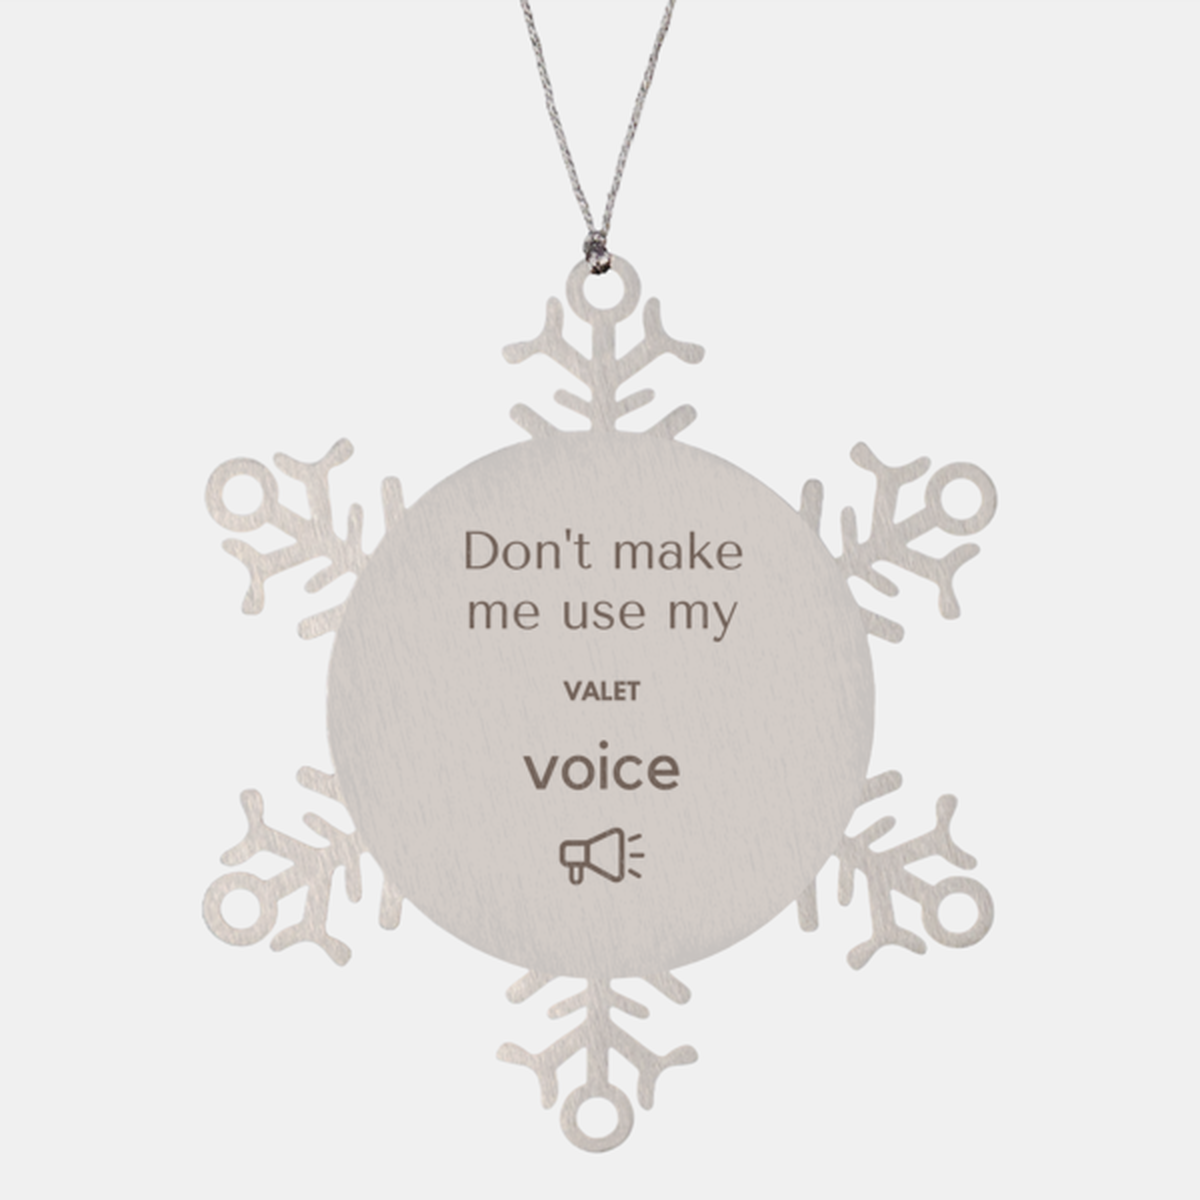 Don't make me use my Valet voice, Sarcasm Valet Ornament Gifts, Christmas Valet Snowflake Ornament Unique Gifts For Valet Coworkers, Men, Women, Colleague, Friends